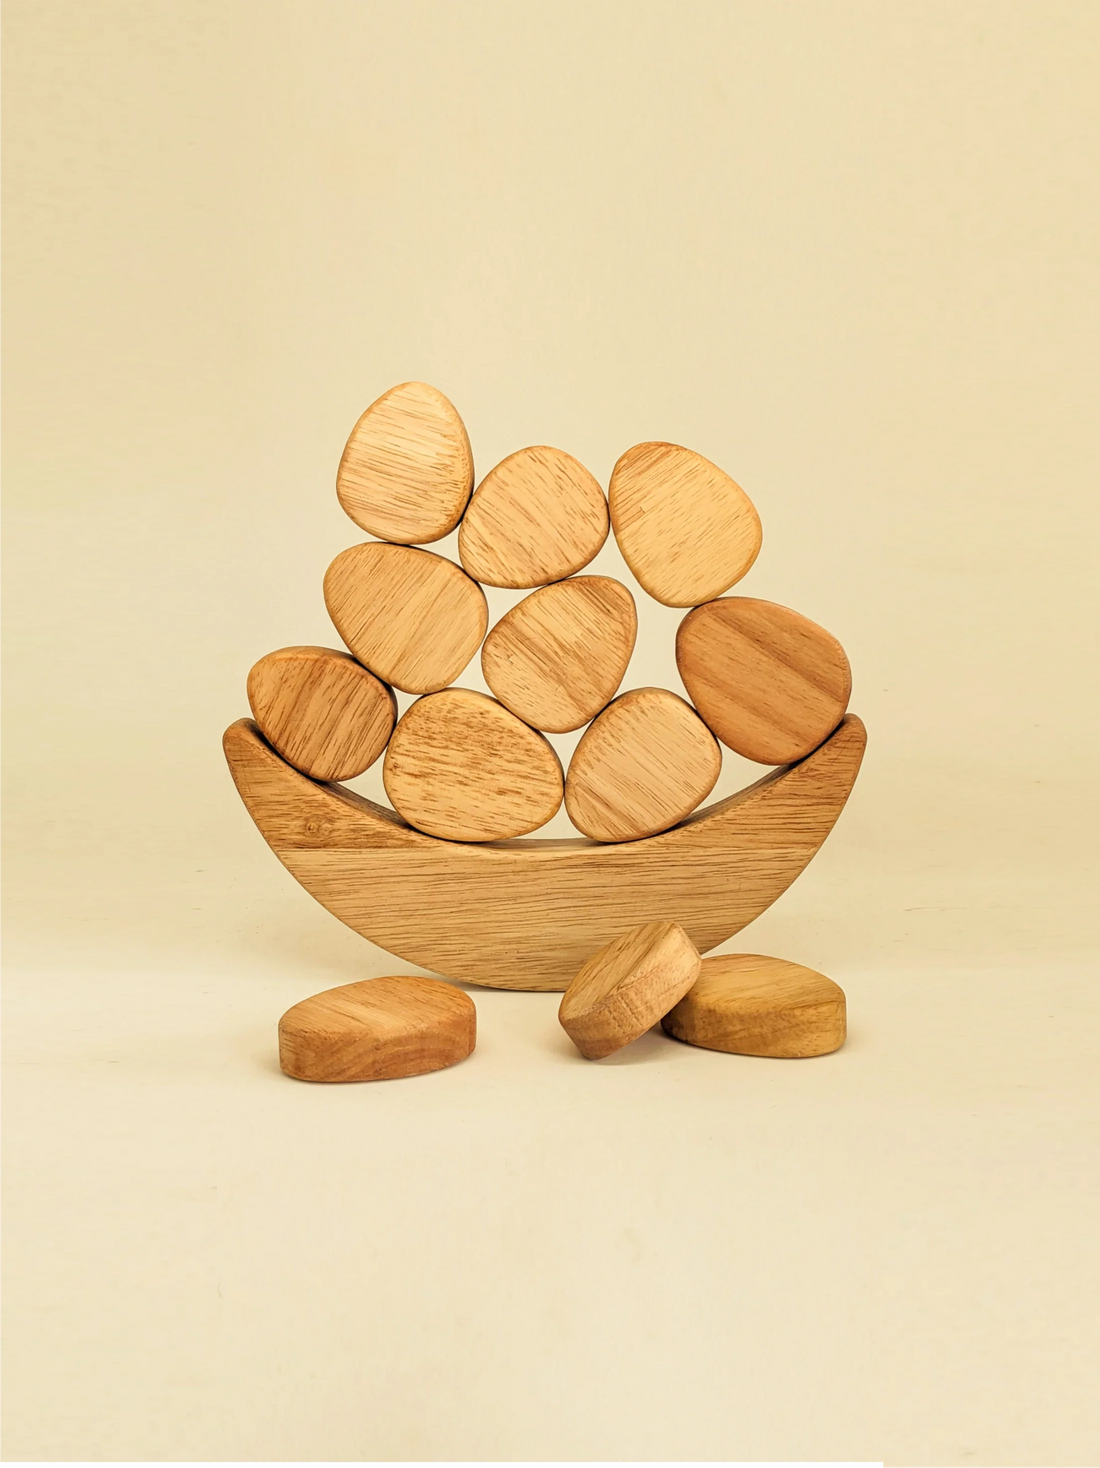 Safe Chewing, Smart Growth: The Hidden Benefits of Wooden Toys